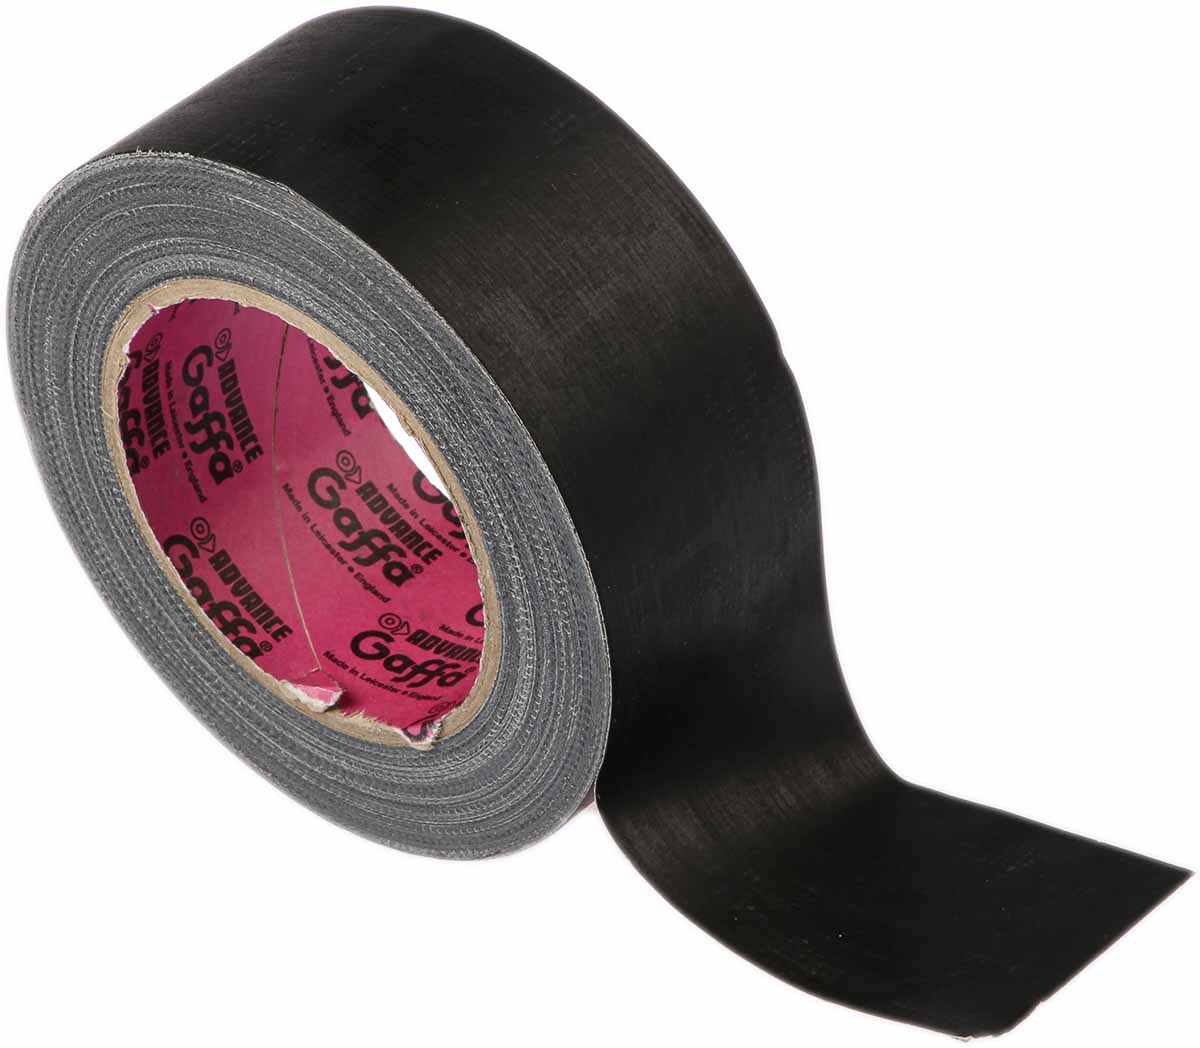 Duct Tape Buyer's Guide